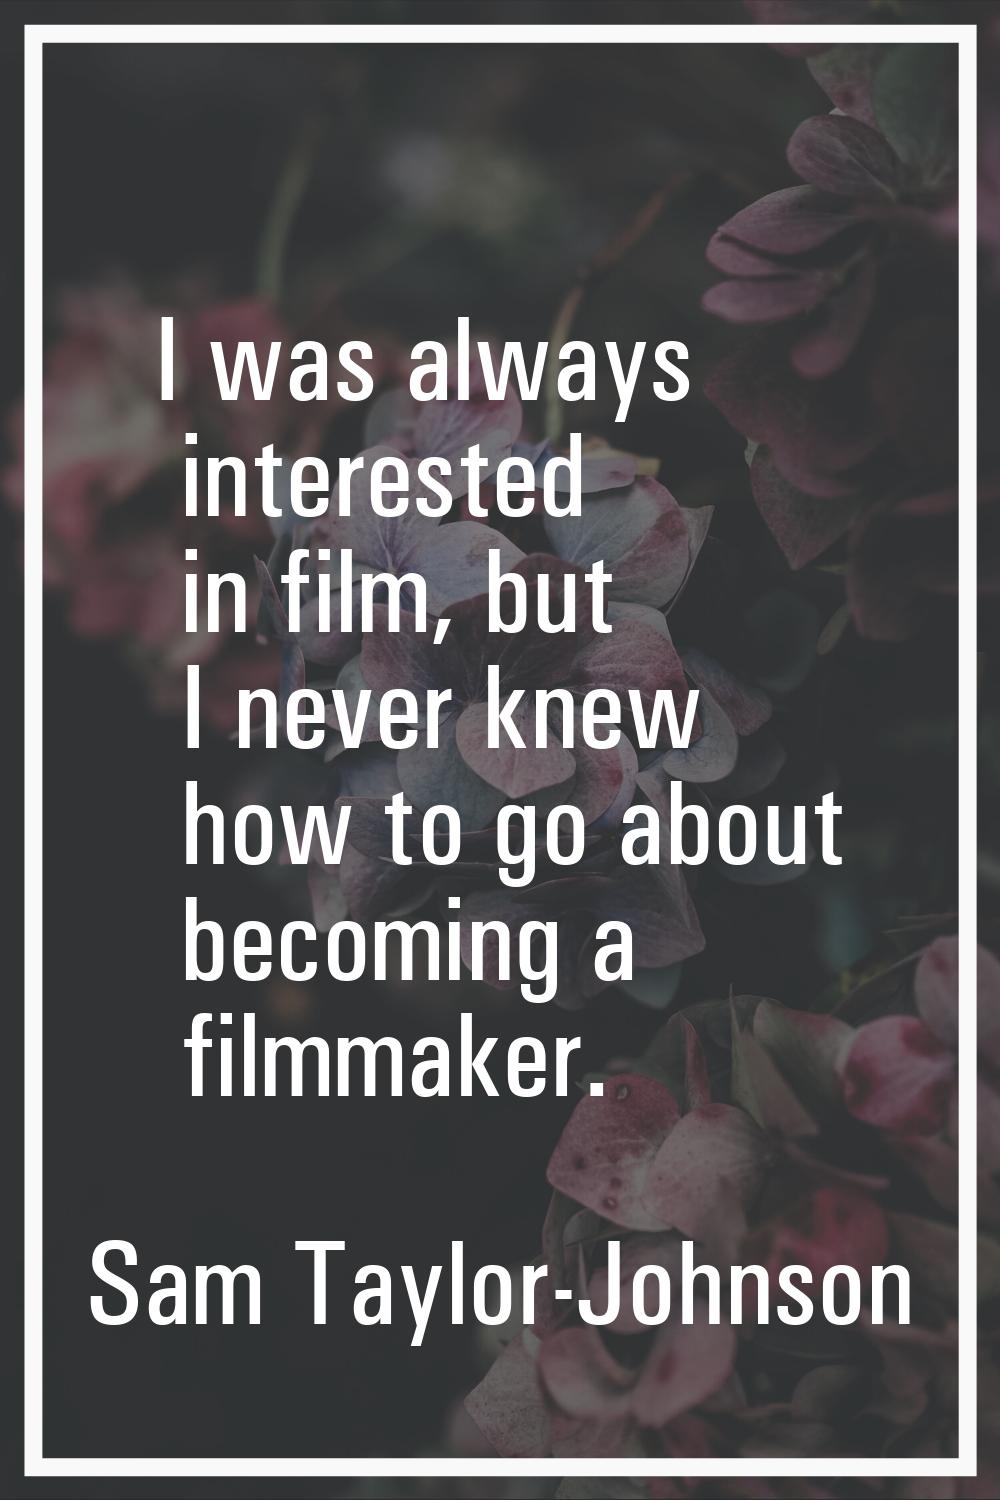 I was always interested in film, but I never knew how to go about becoming a filmmaker.